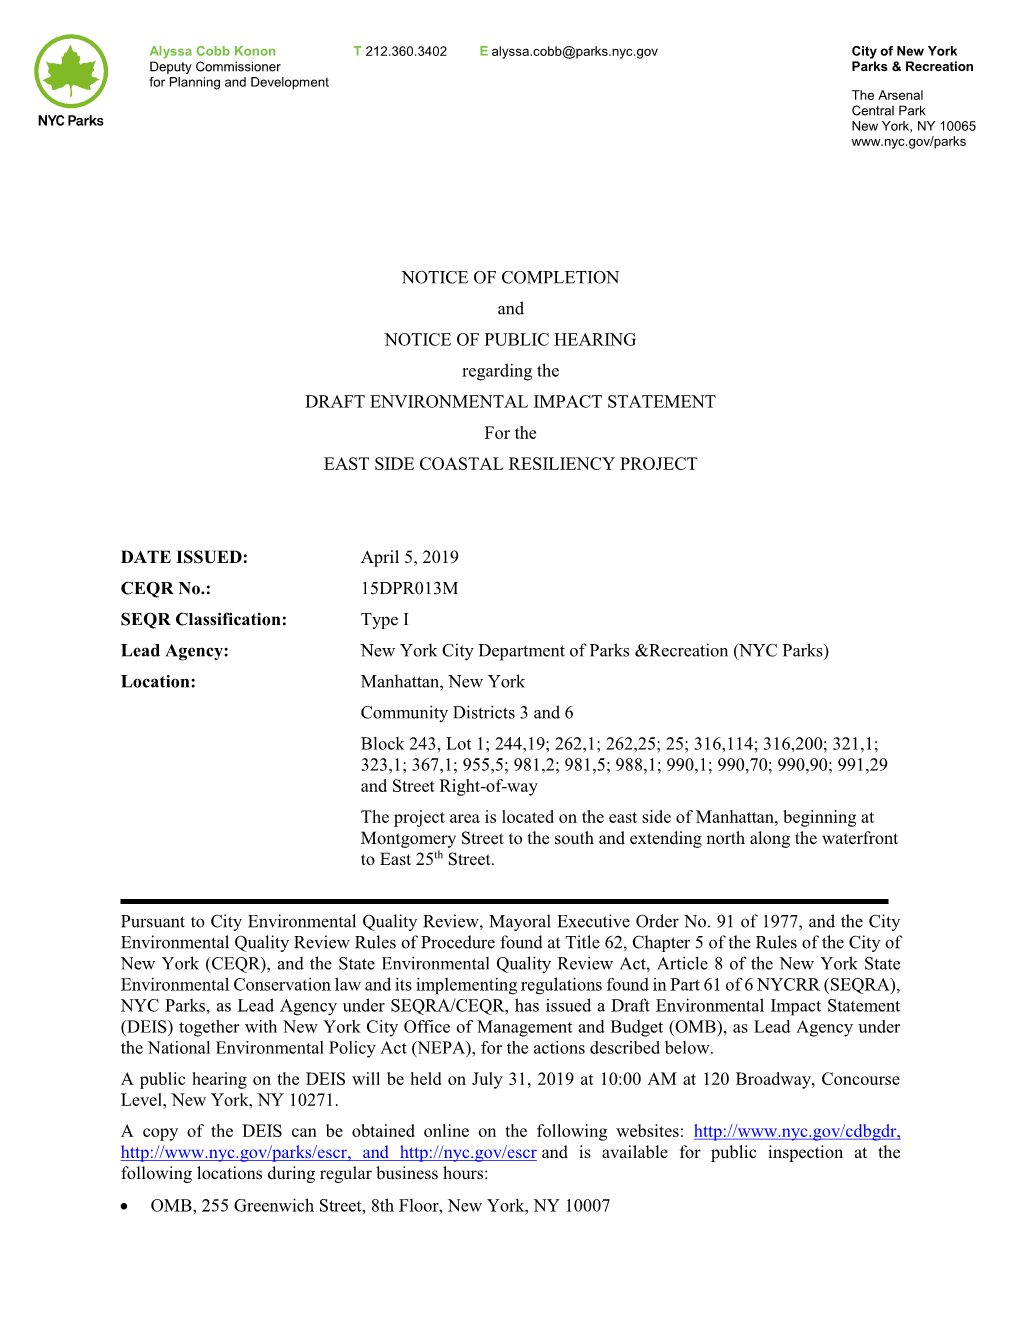 Notice of Completion (April 5, 2019)